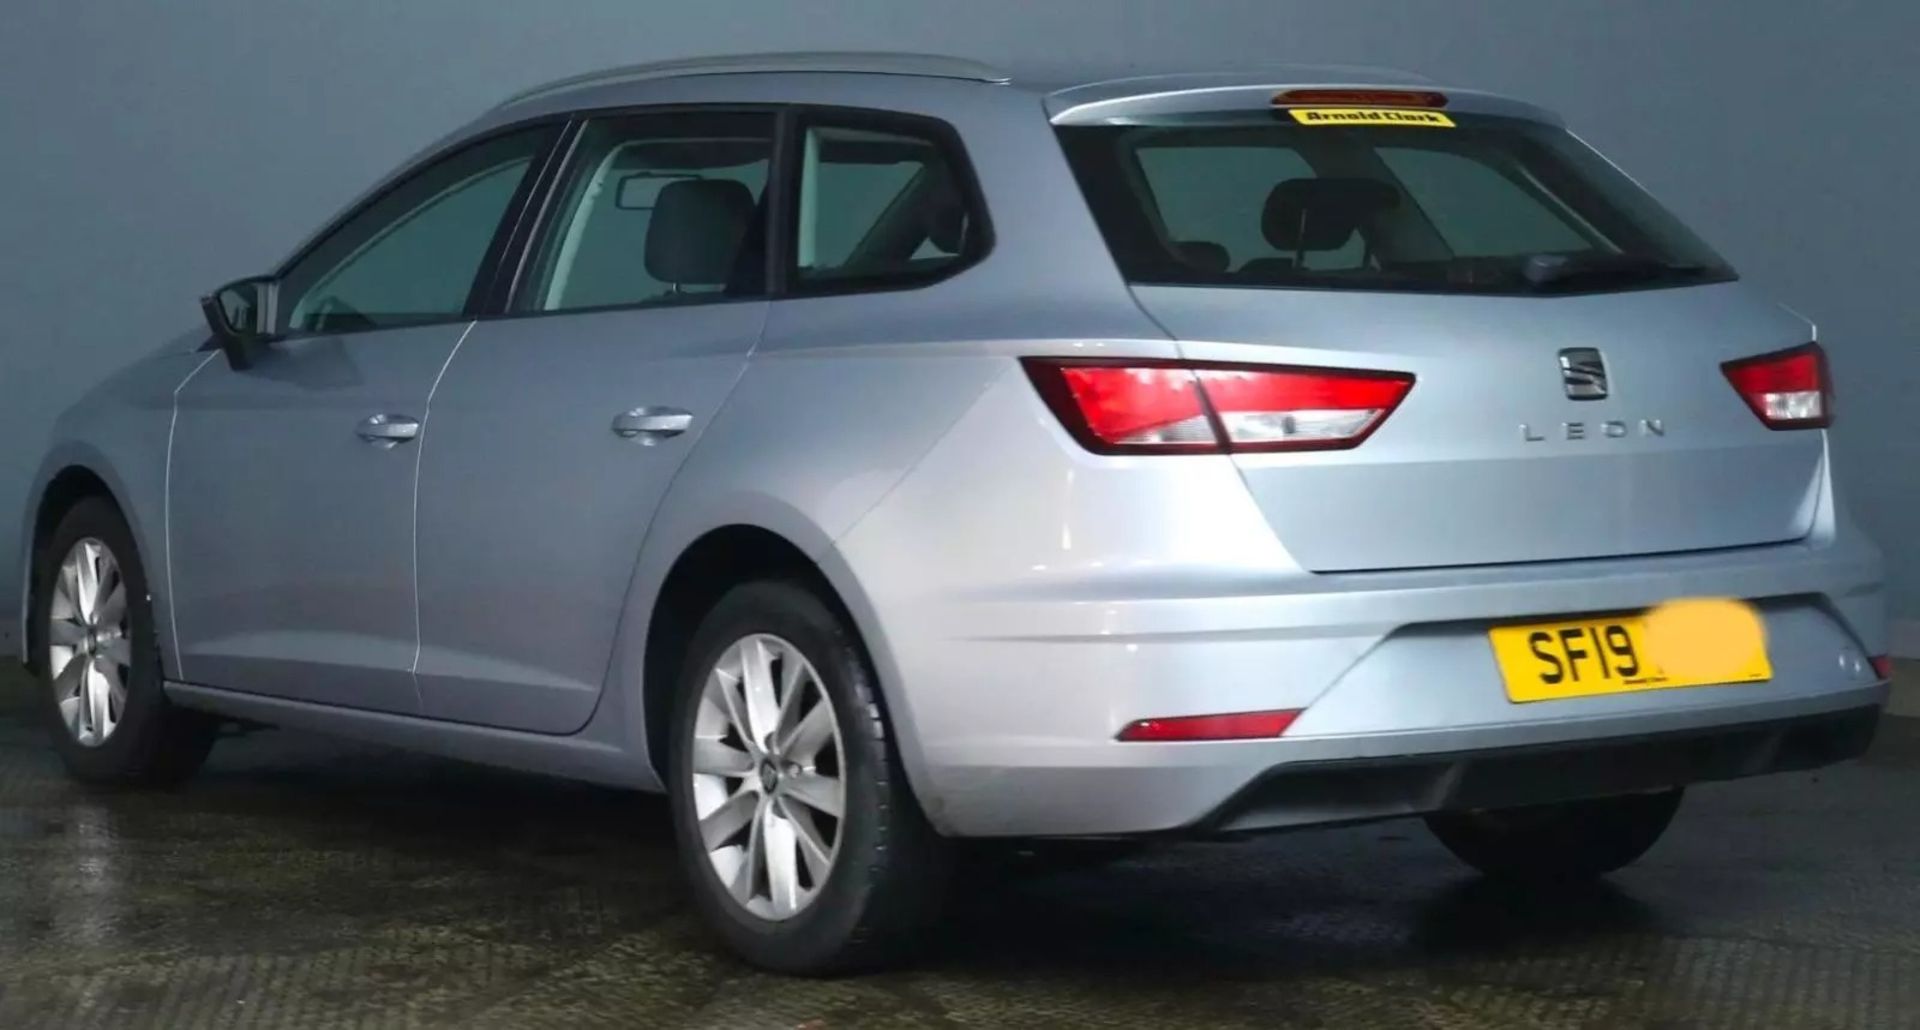 >>--NO VAT ON HAMMER--<< EFFICIENT 2019 SEAT LEON 1.6 TDI SE ESTATE - RELIABLE AND SPACIOUS! - Image 3 of 12